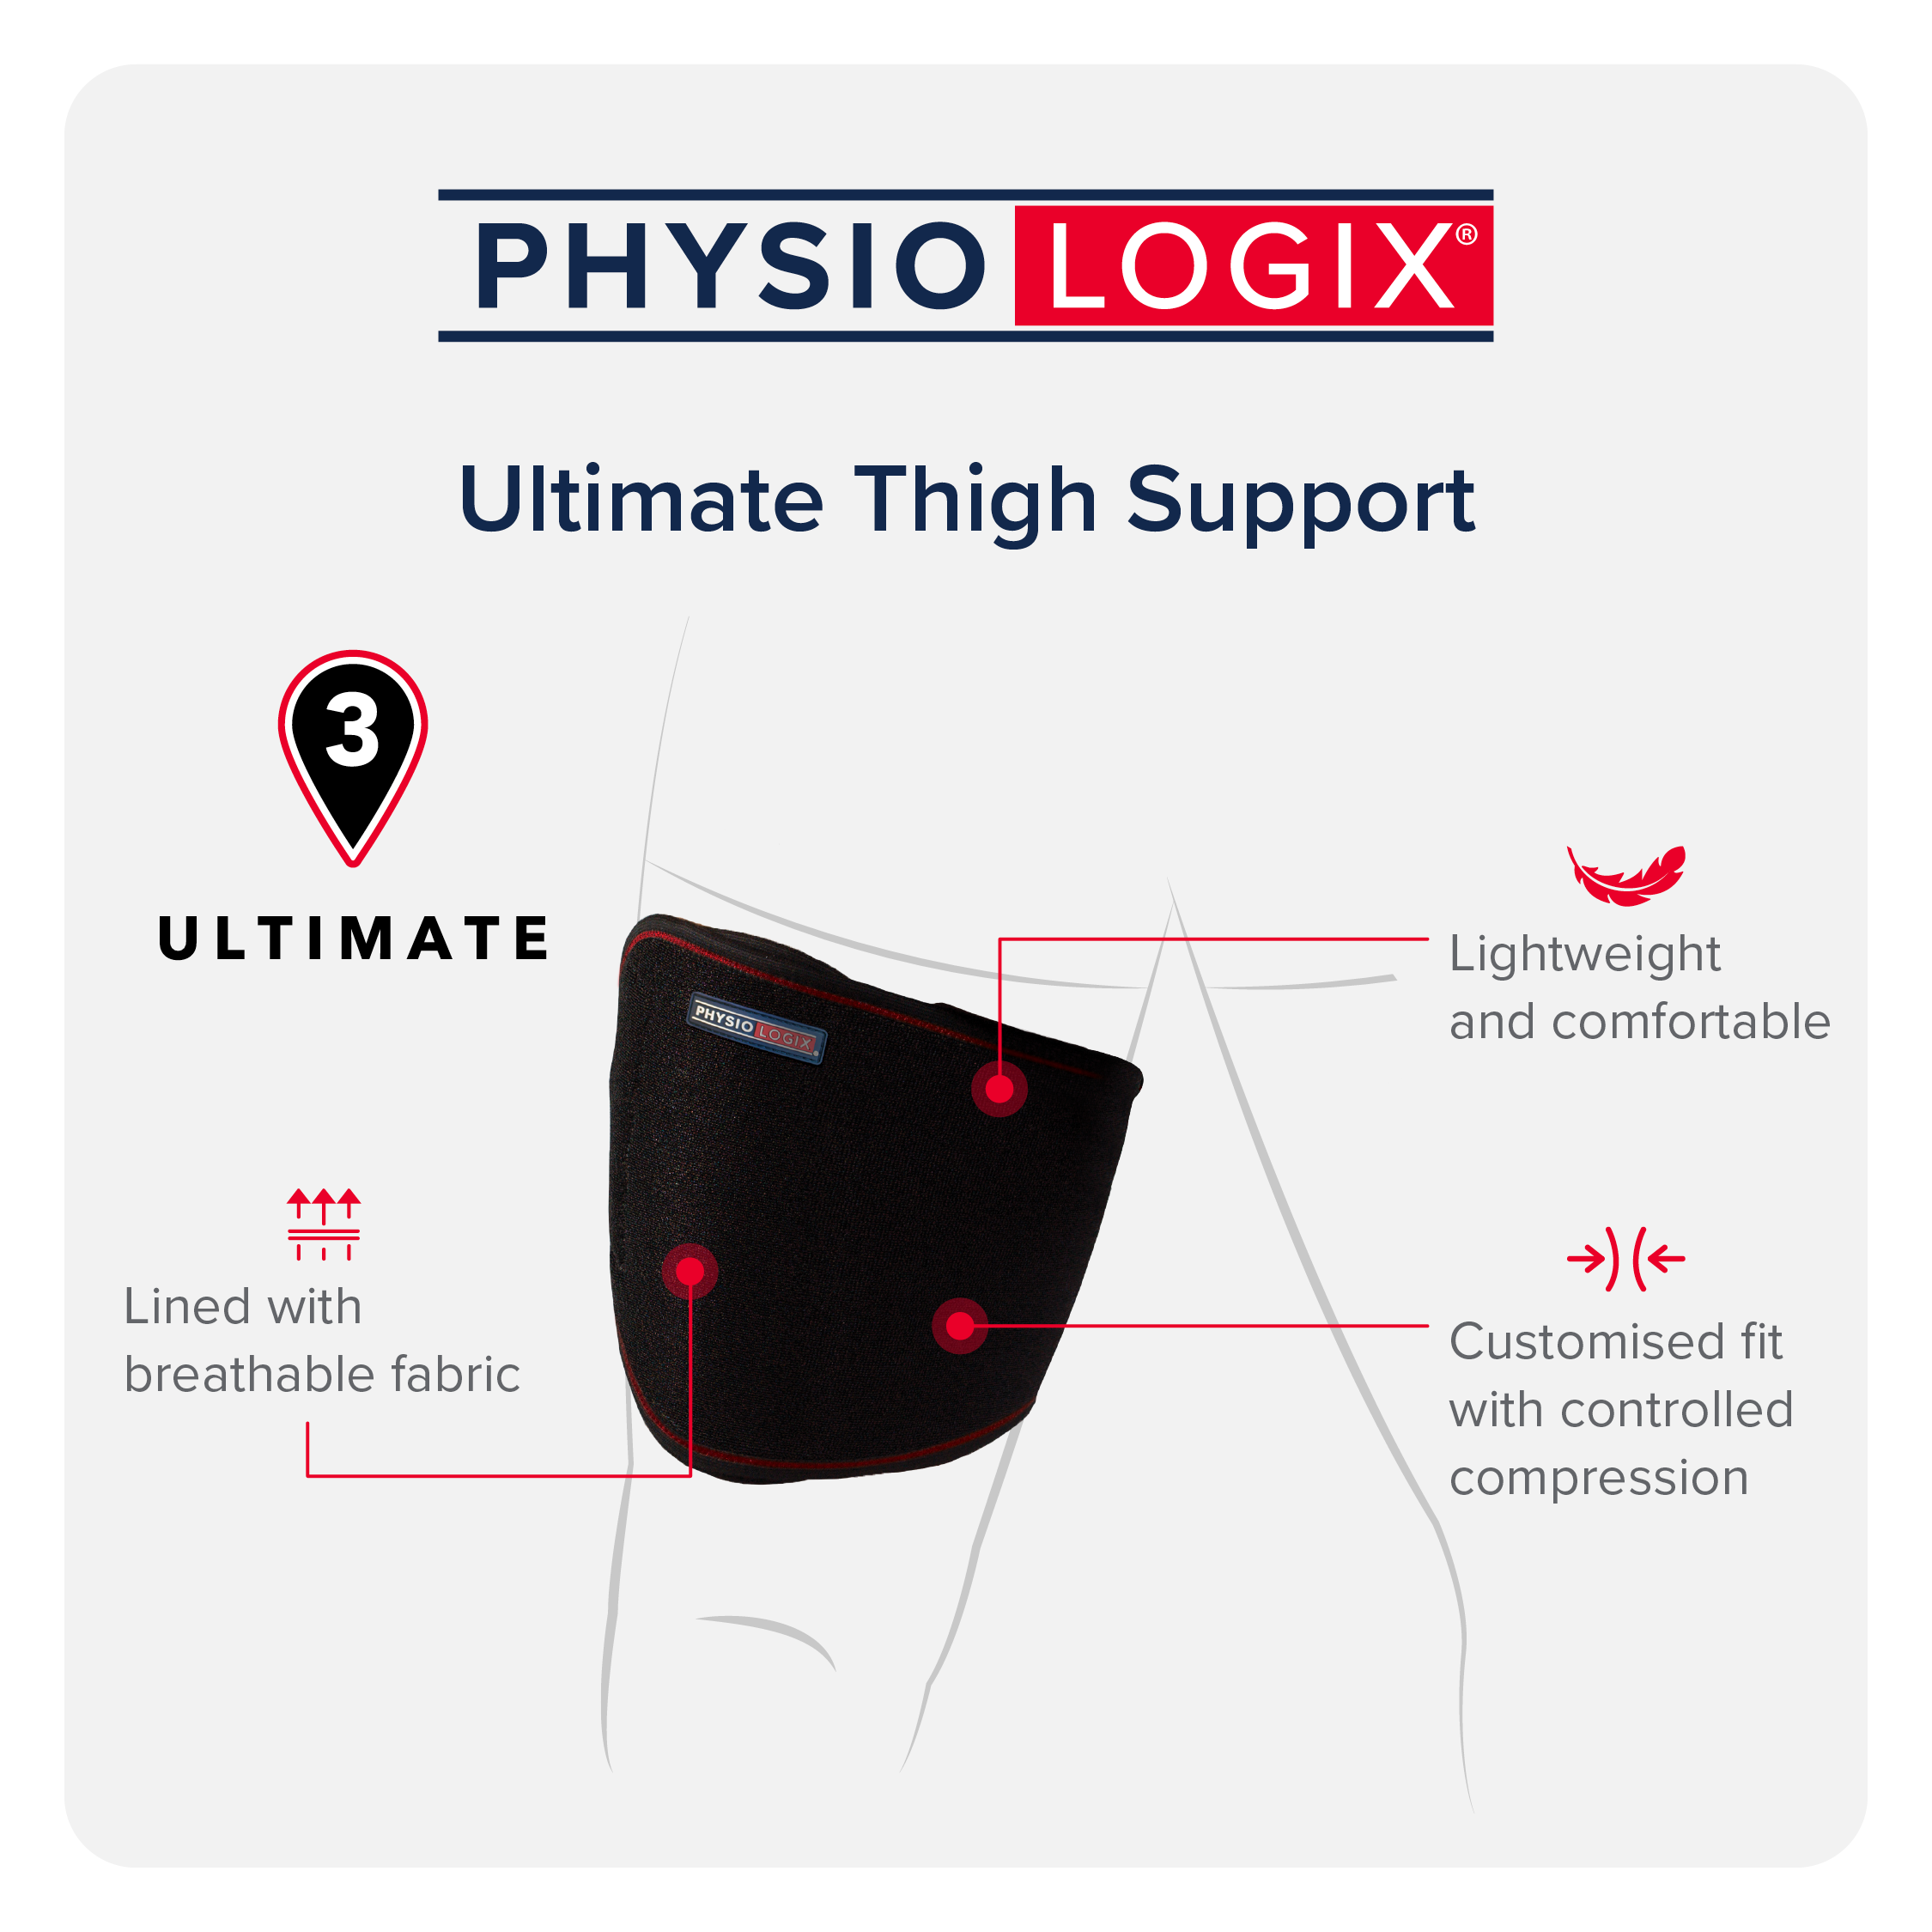 Physiologix Ultimate Thigh Support Features